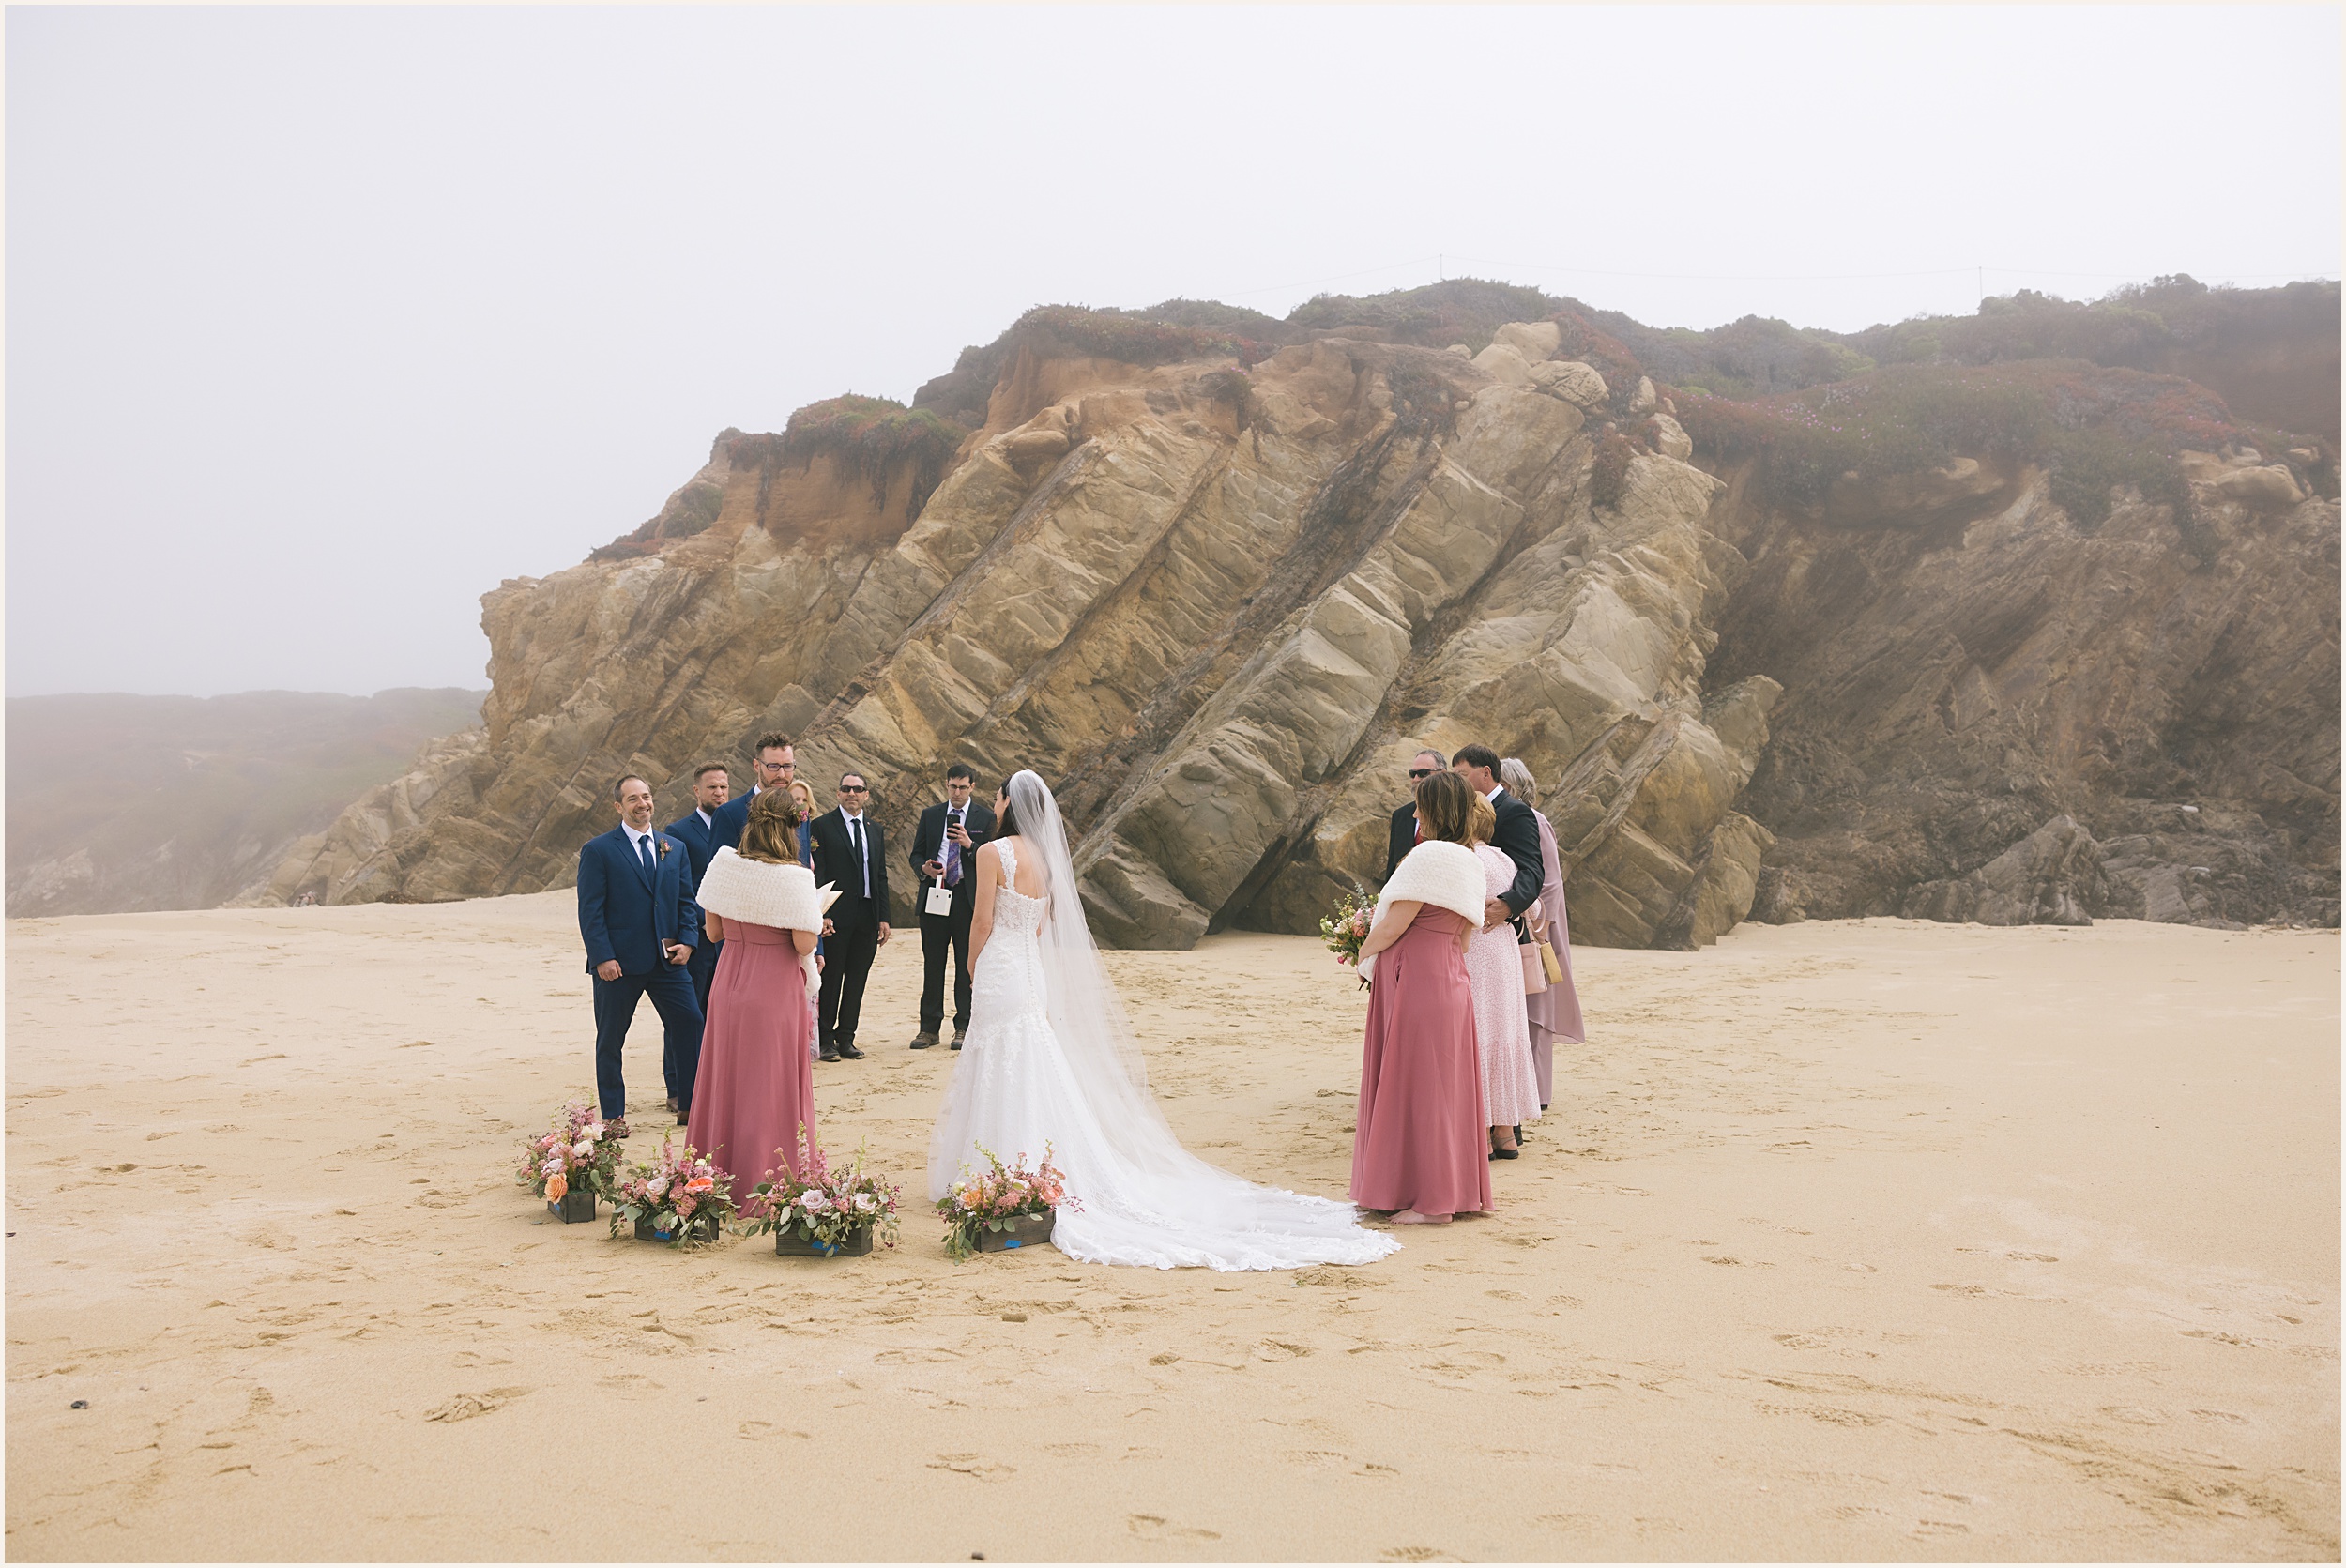 Kelsey-and-Ben-74 Charming Carmel-By-The-Sea Intimate Wedding